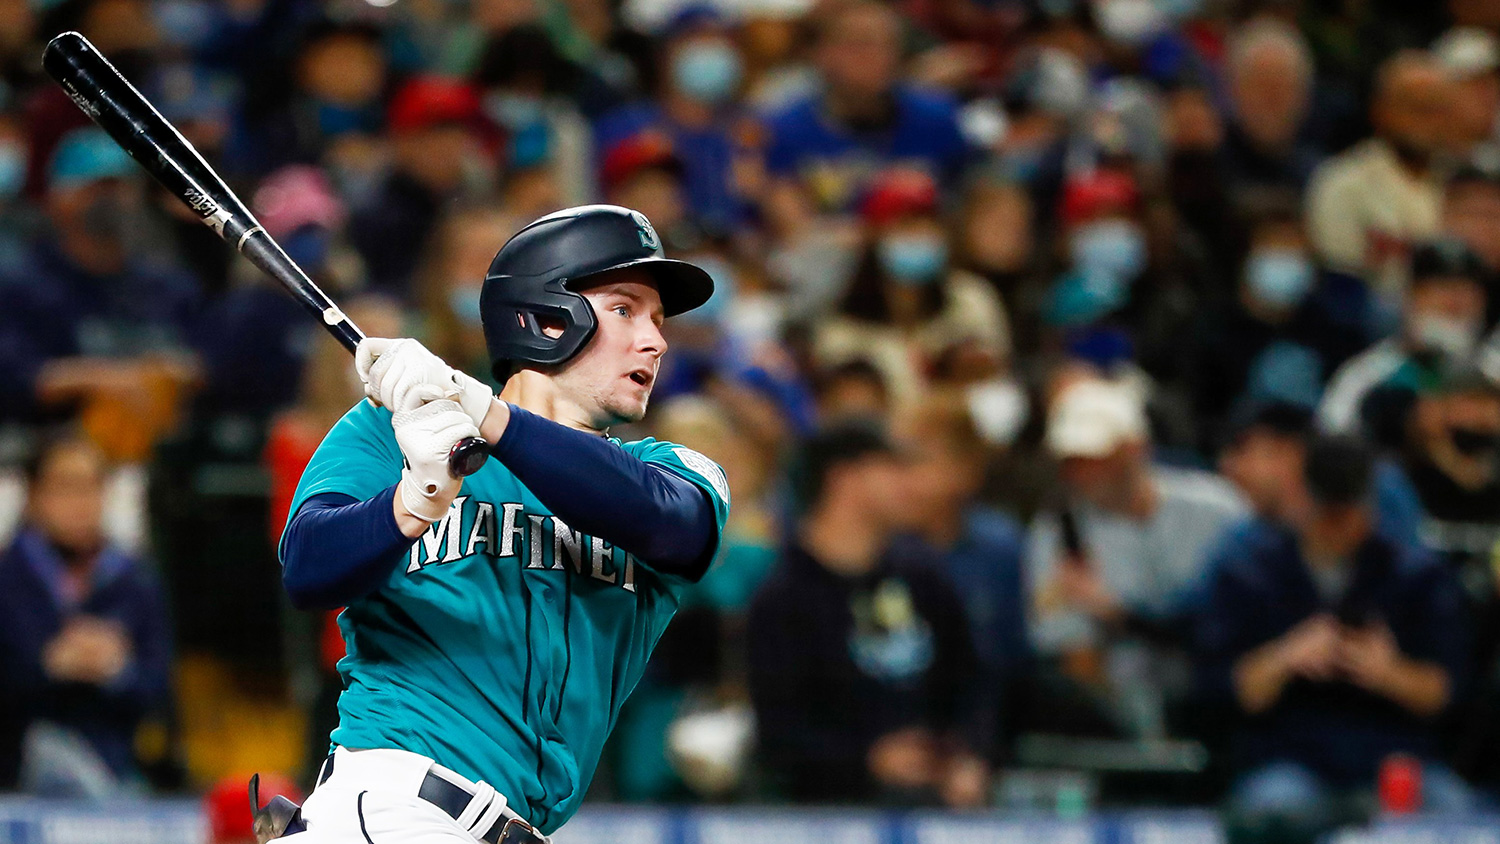 Get to know the 2022 Mariners